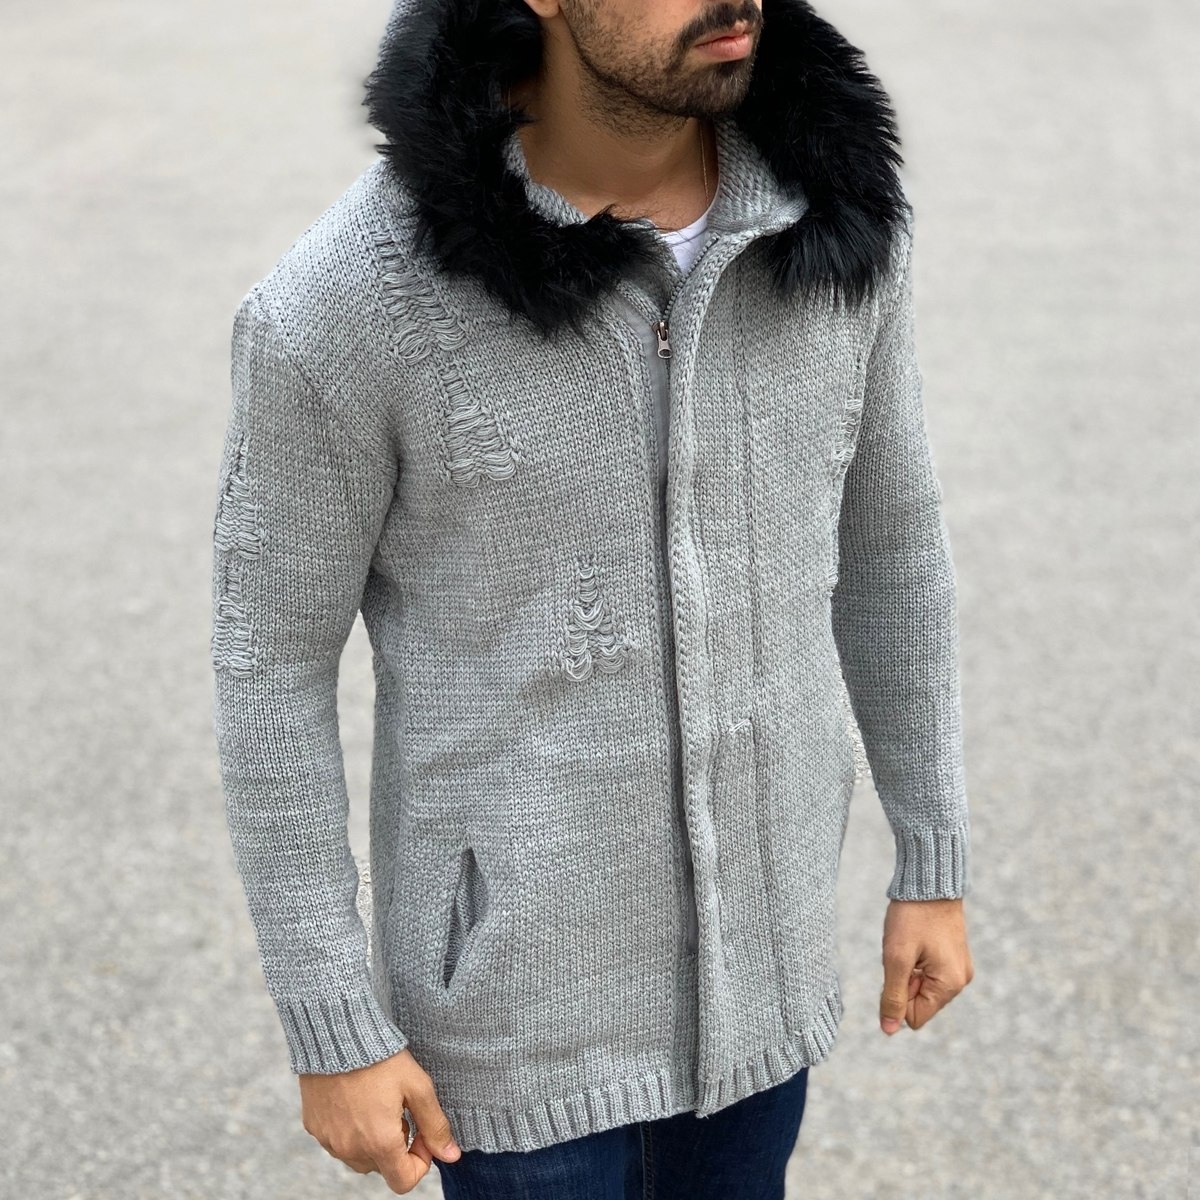 Cardigan Hoodie with Furry Hood and Worn Design in Grey - 4